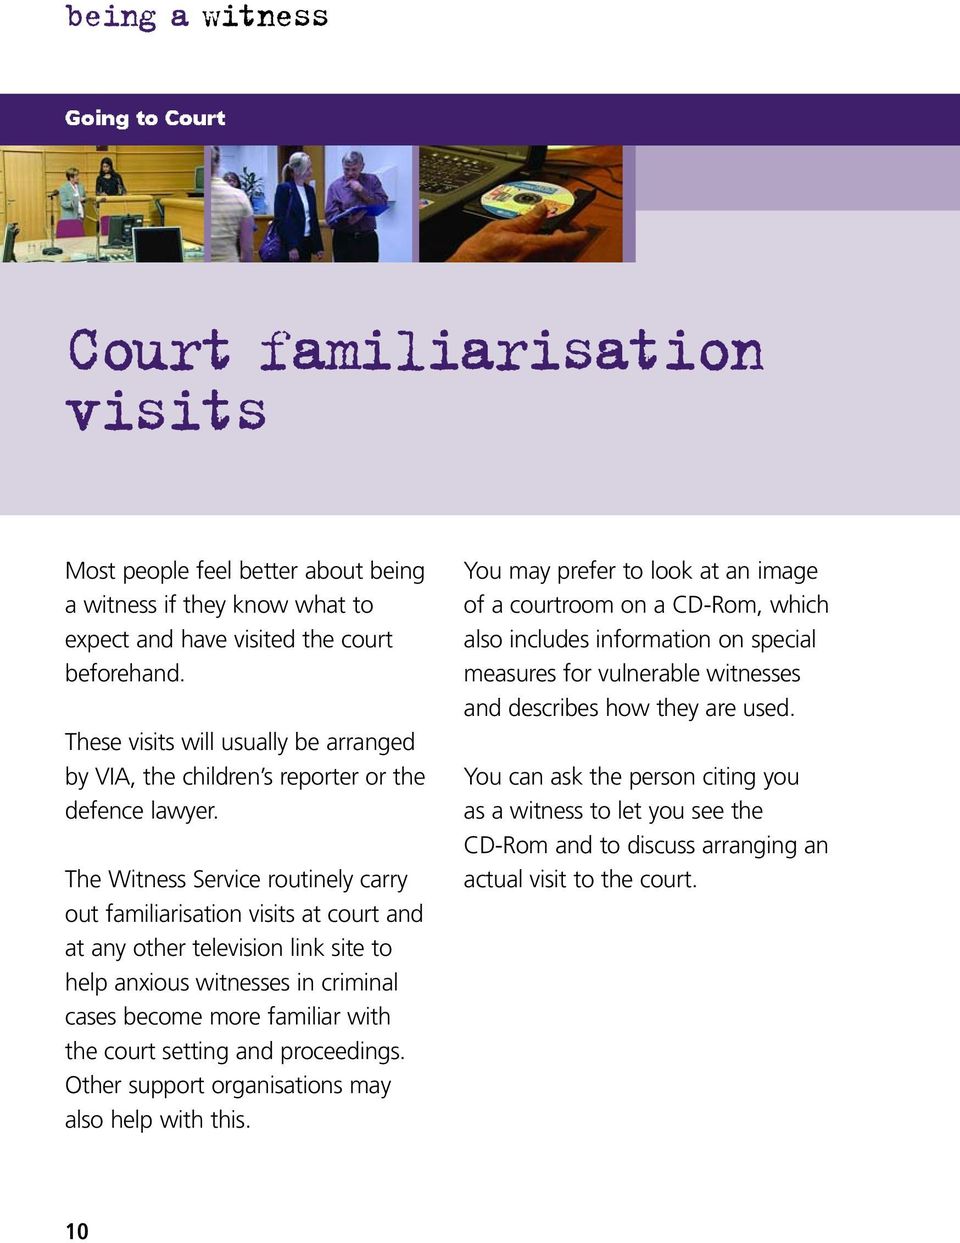 The Witness Service routinely carry out familiarisation visits at court and at any other television link site to help anxious witnesses in criminal cases become more familiar with the court setting